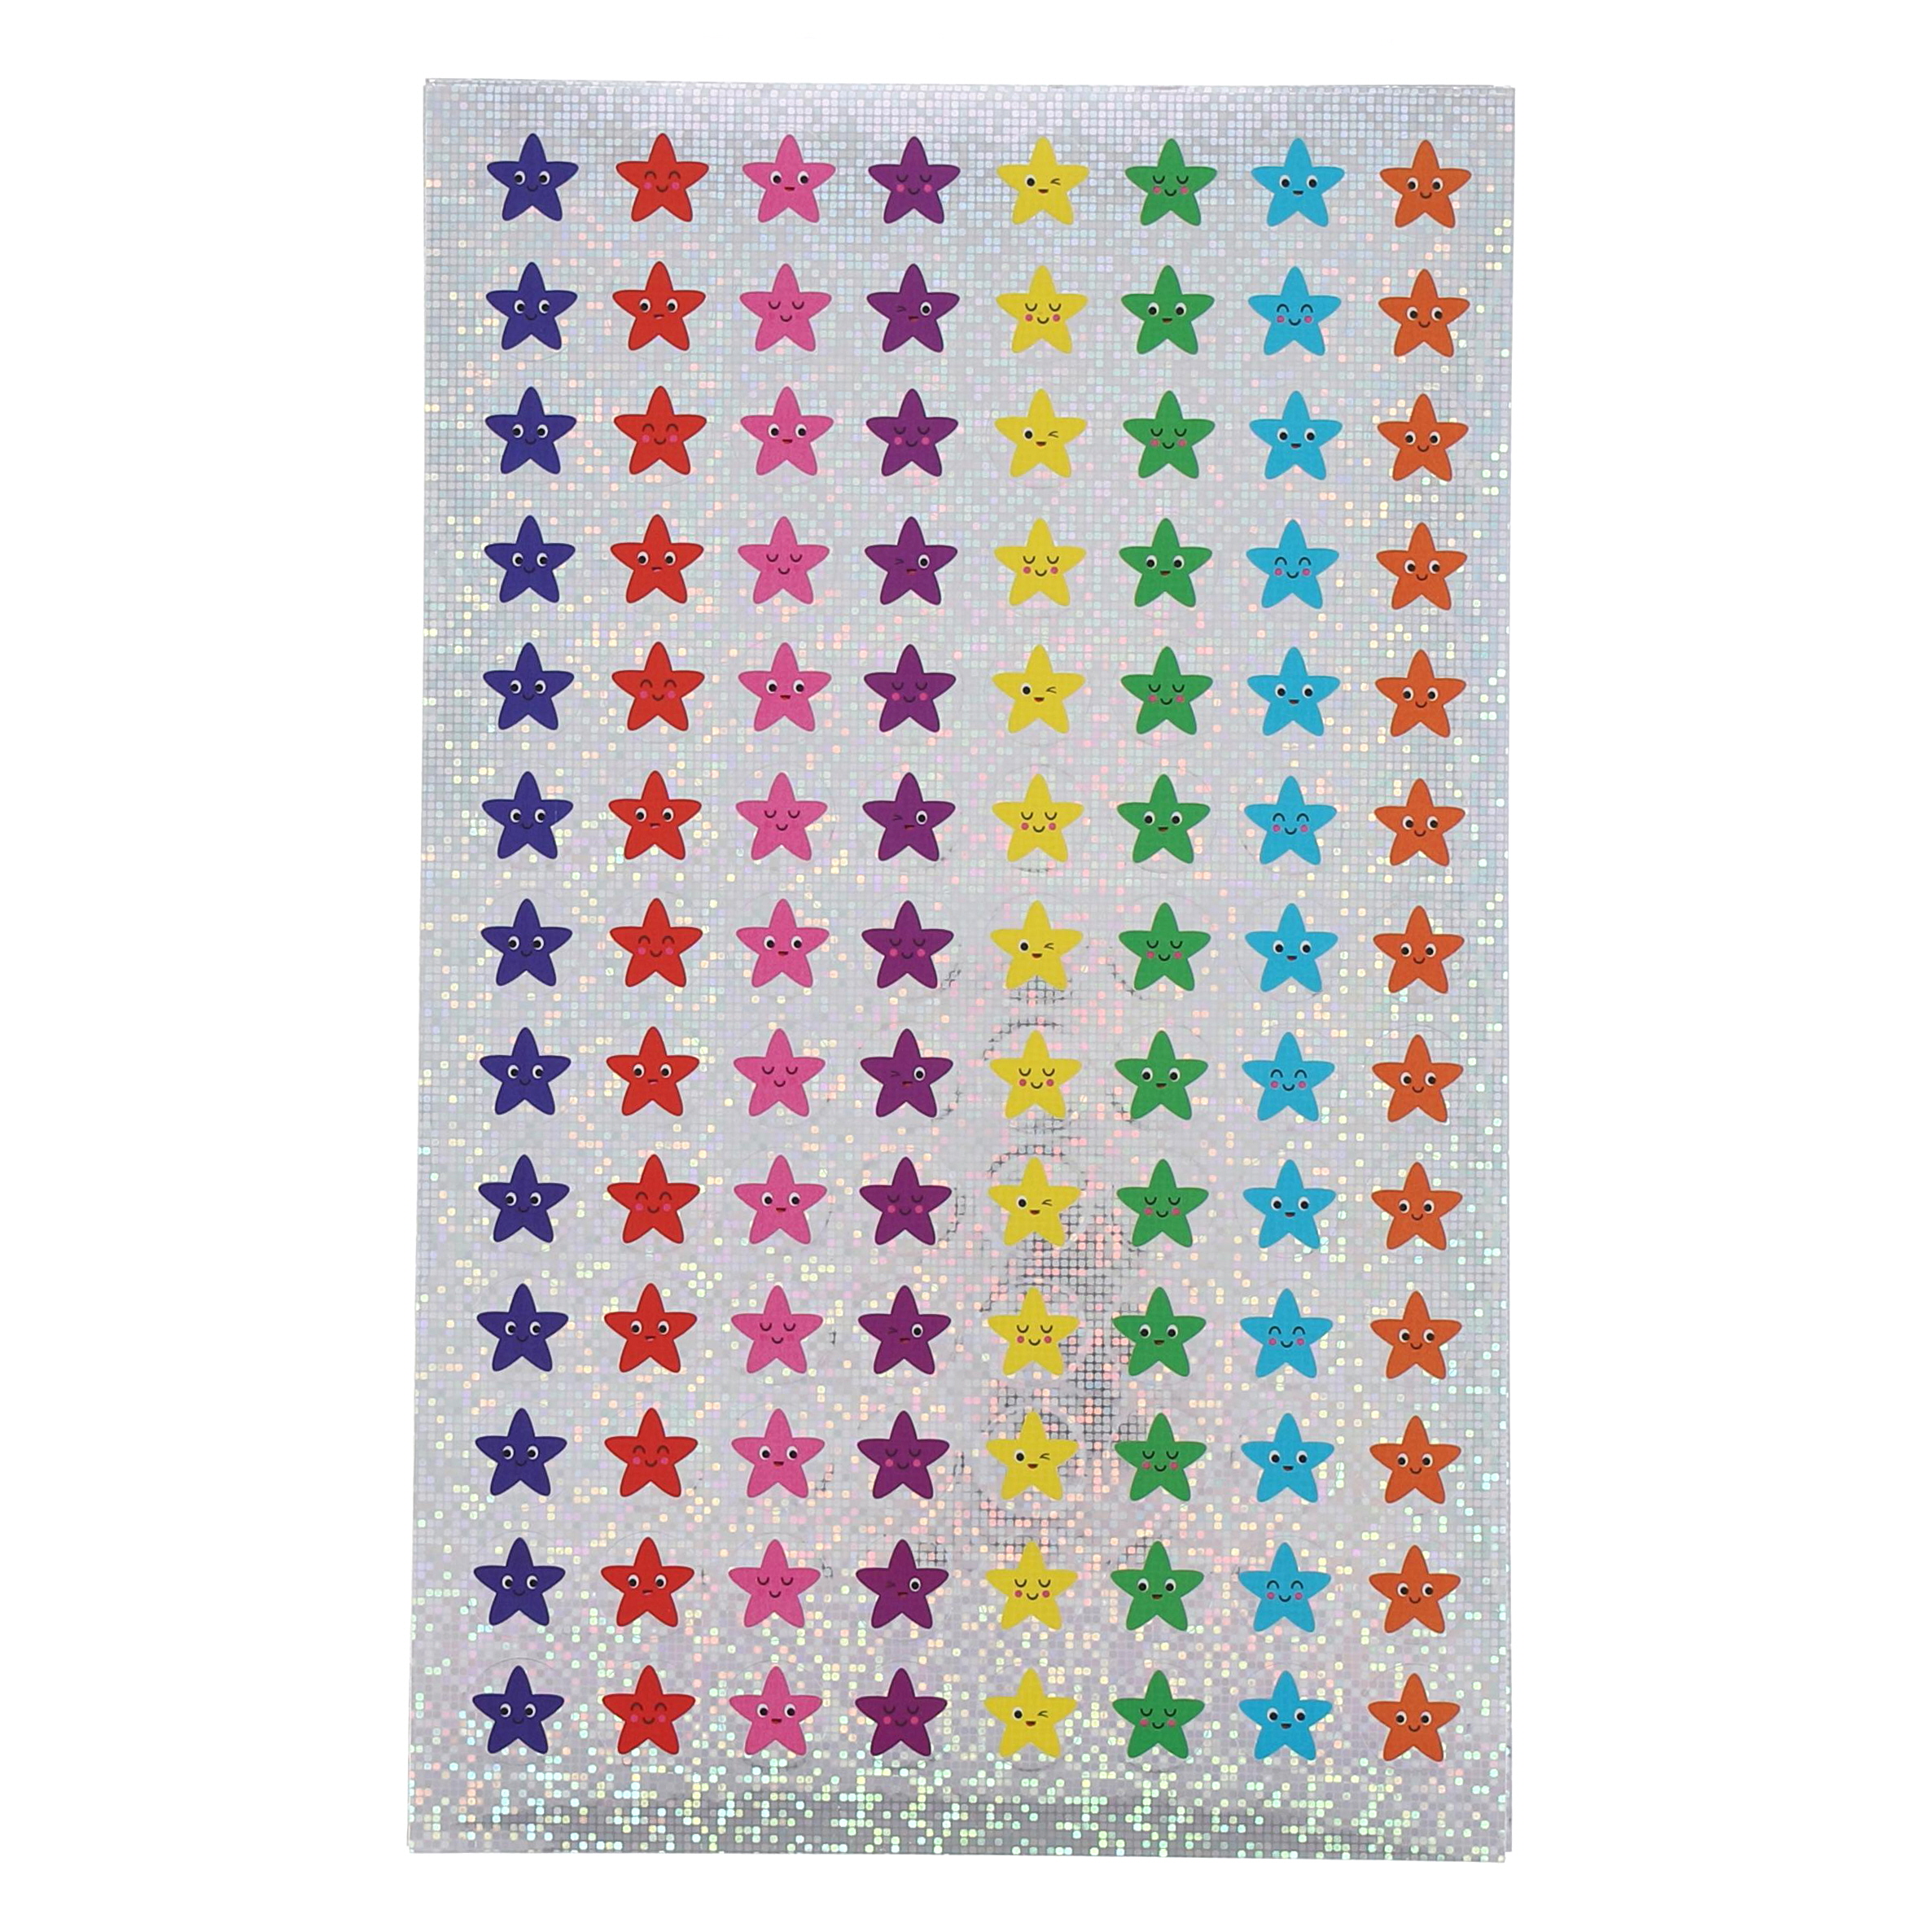 G1778901 - Classmates Value Star Stickers - Gold - Pack of 135